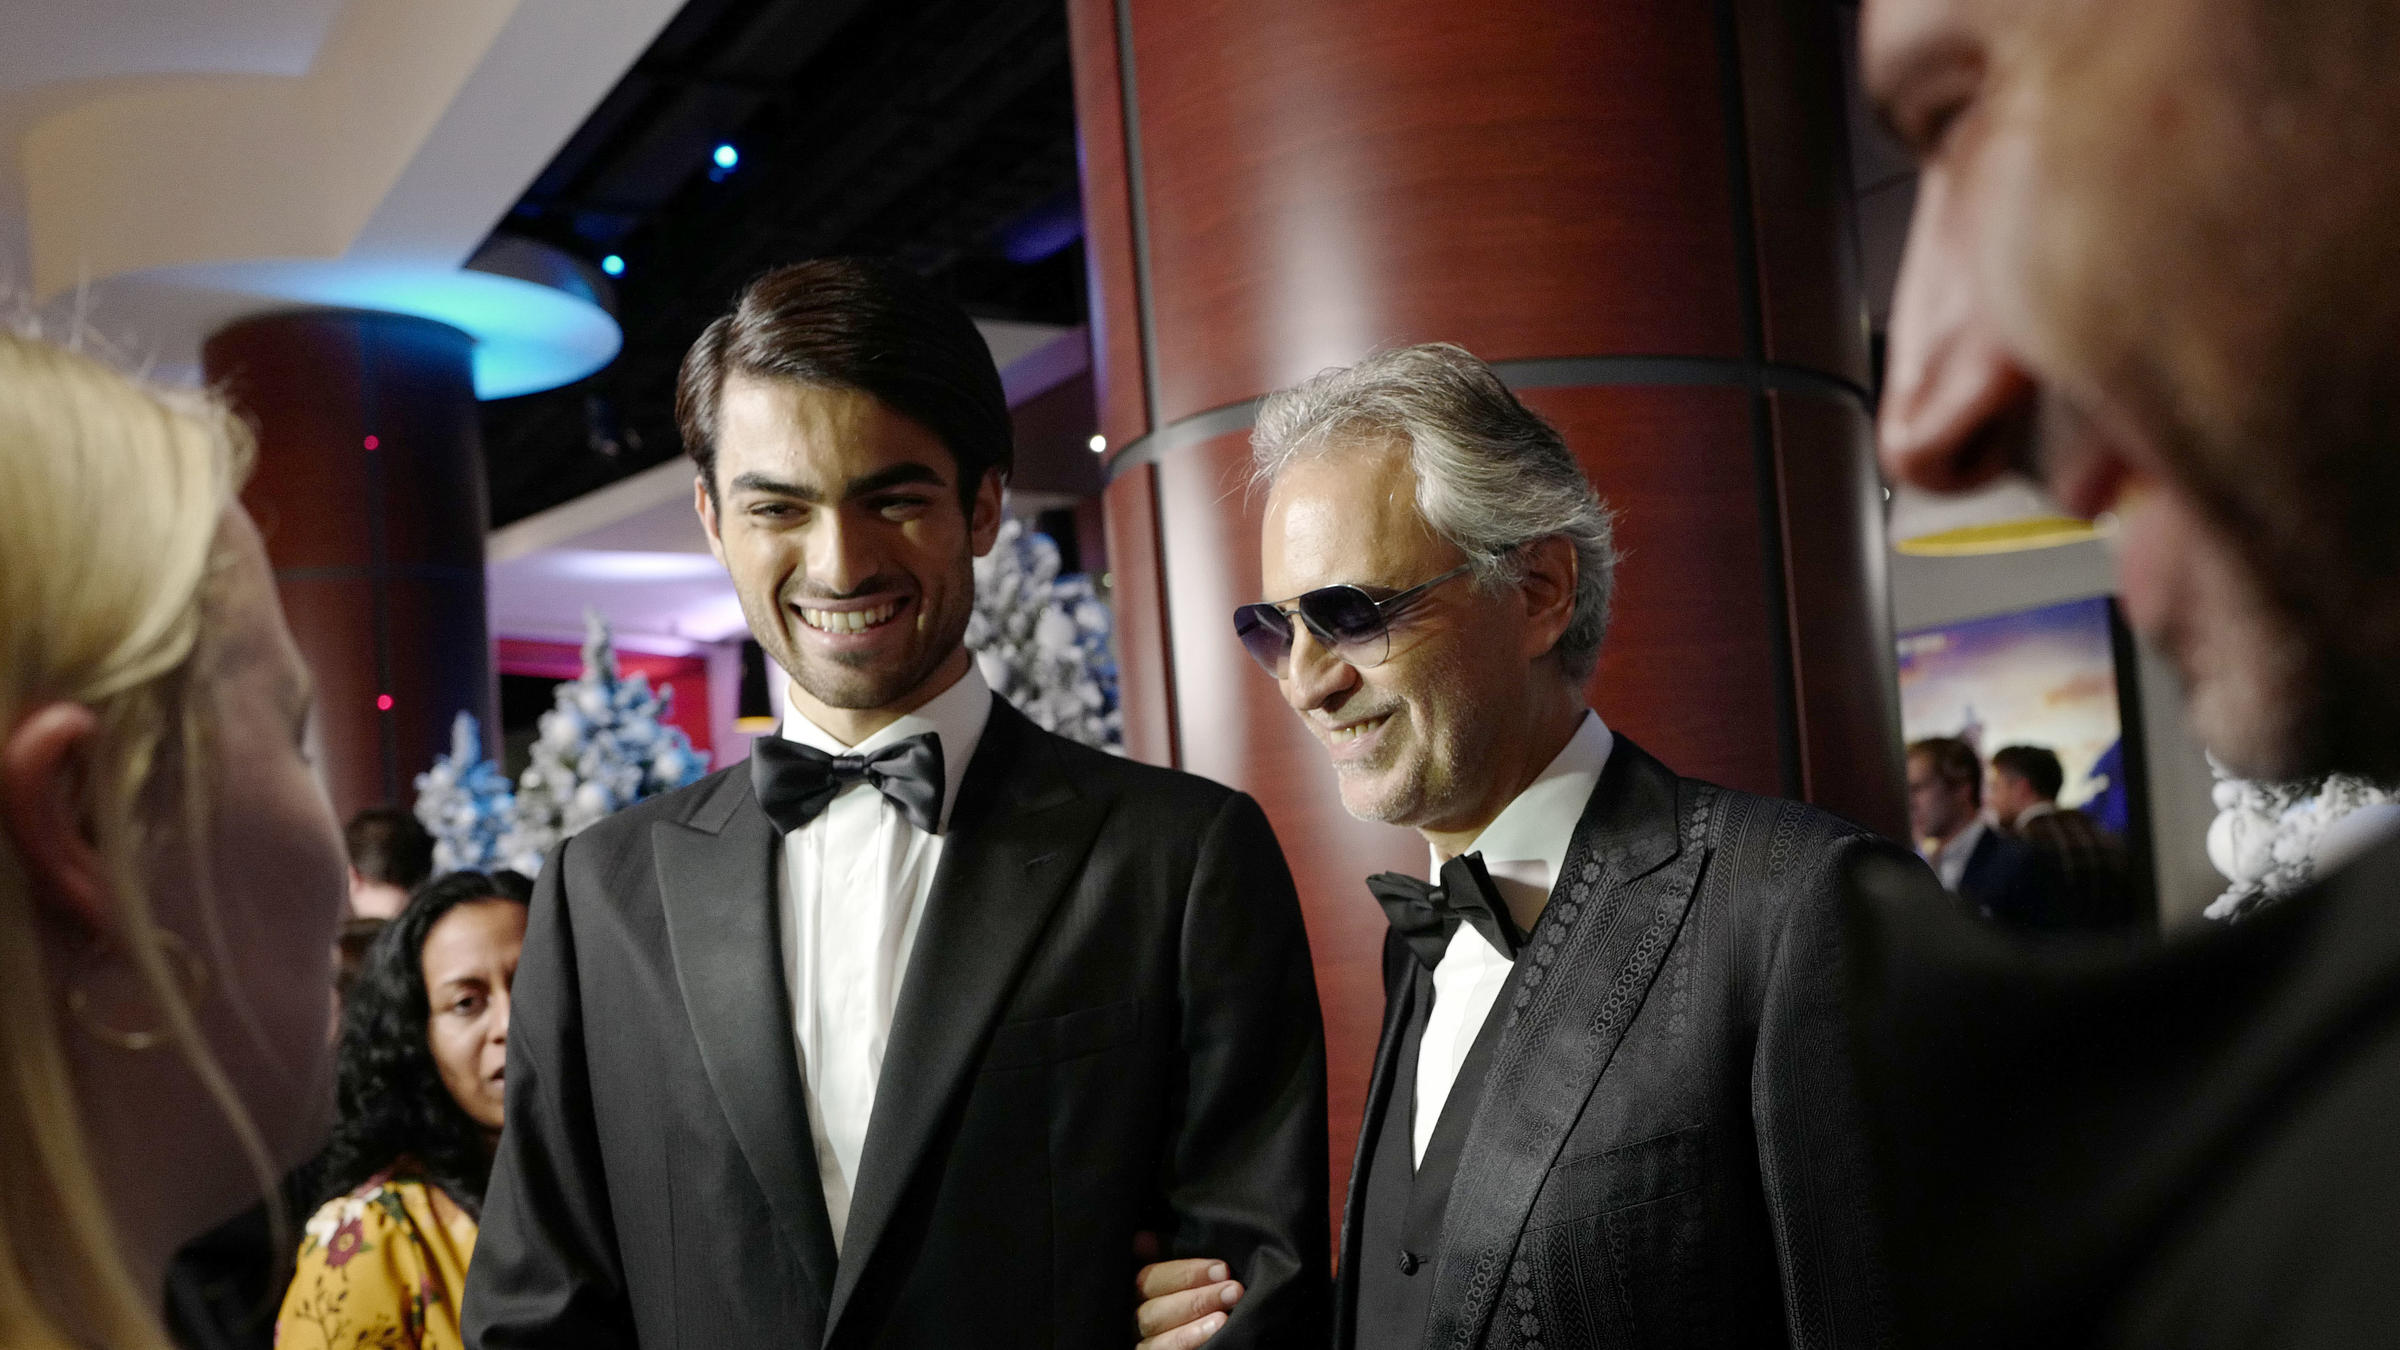 Andrea Bocelli Passes The Art Of Expressive Singing To His Son | WPRL2400 x 1350